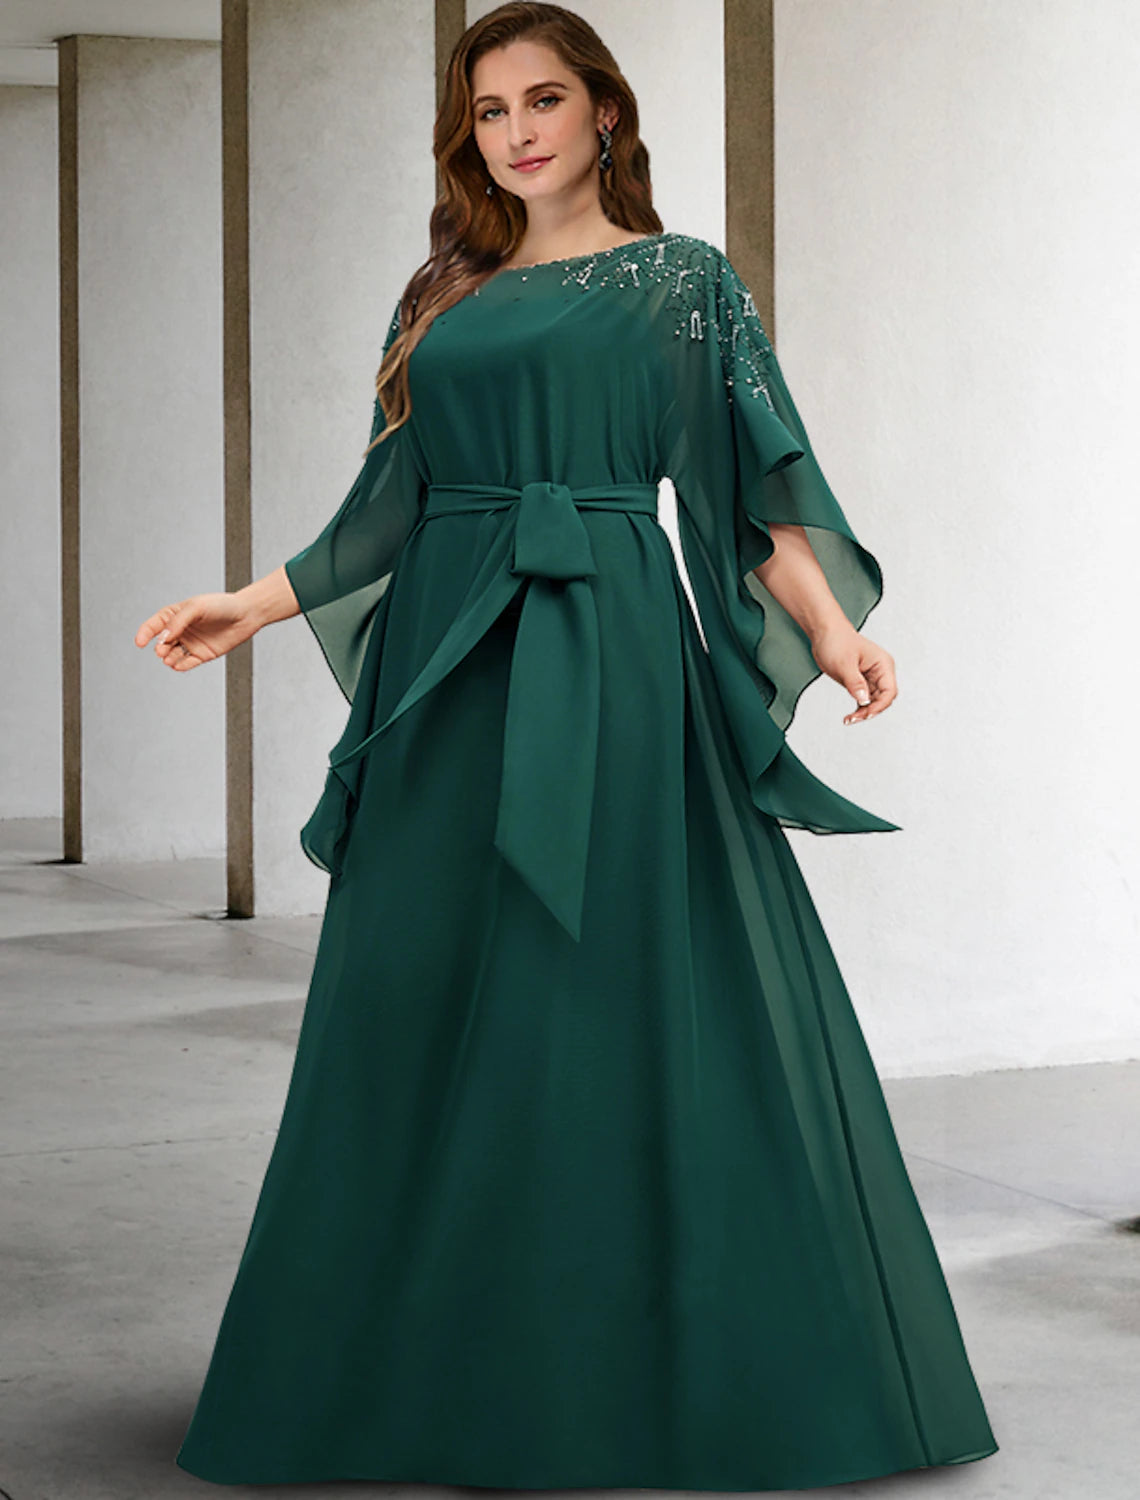 A-Line Plus Size Curve Mother of the Bride Dresses Elegant Dress Formal Floor Length Half Sleeve Jewel Neck Chiffon with Beading Strappy